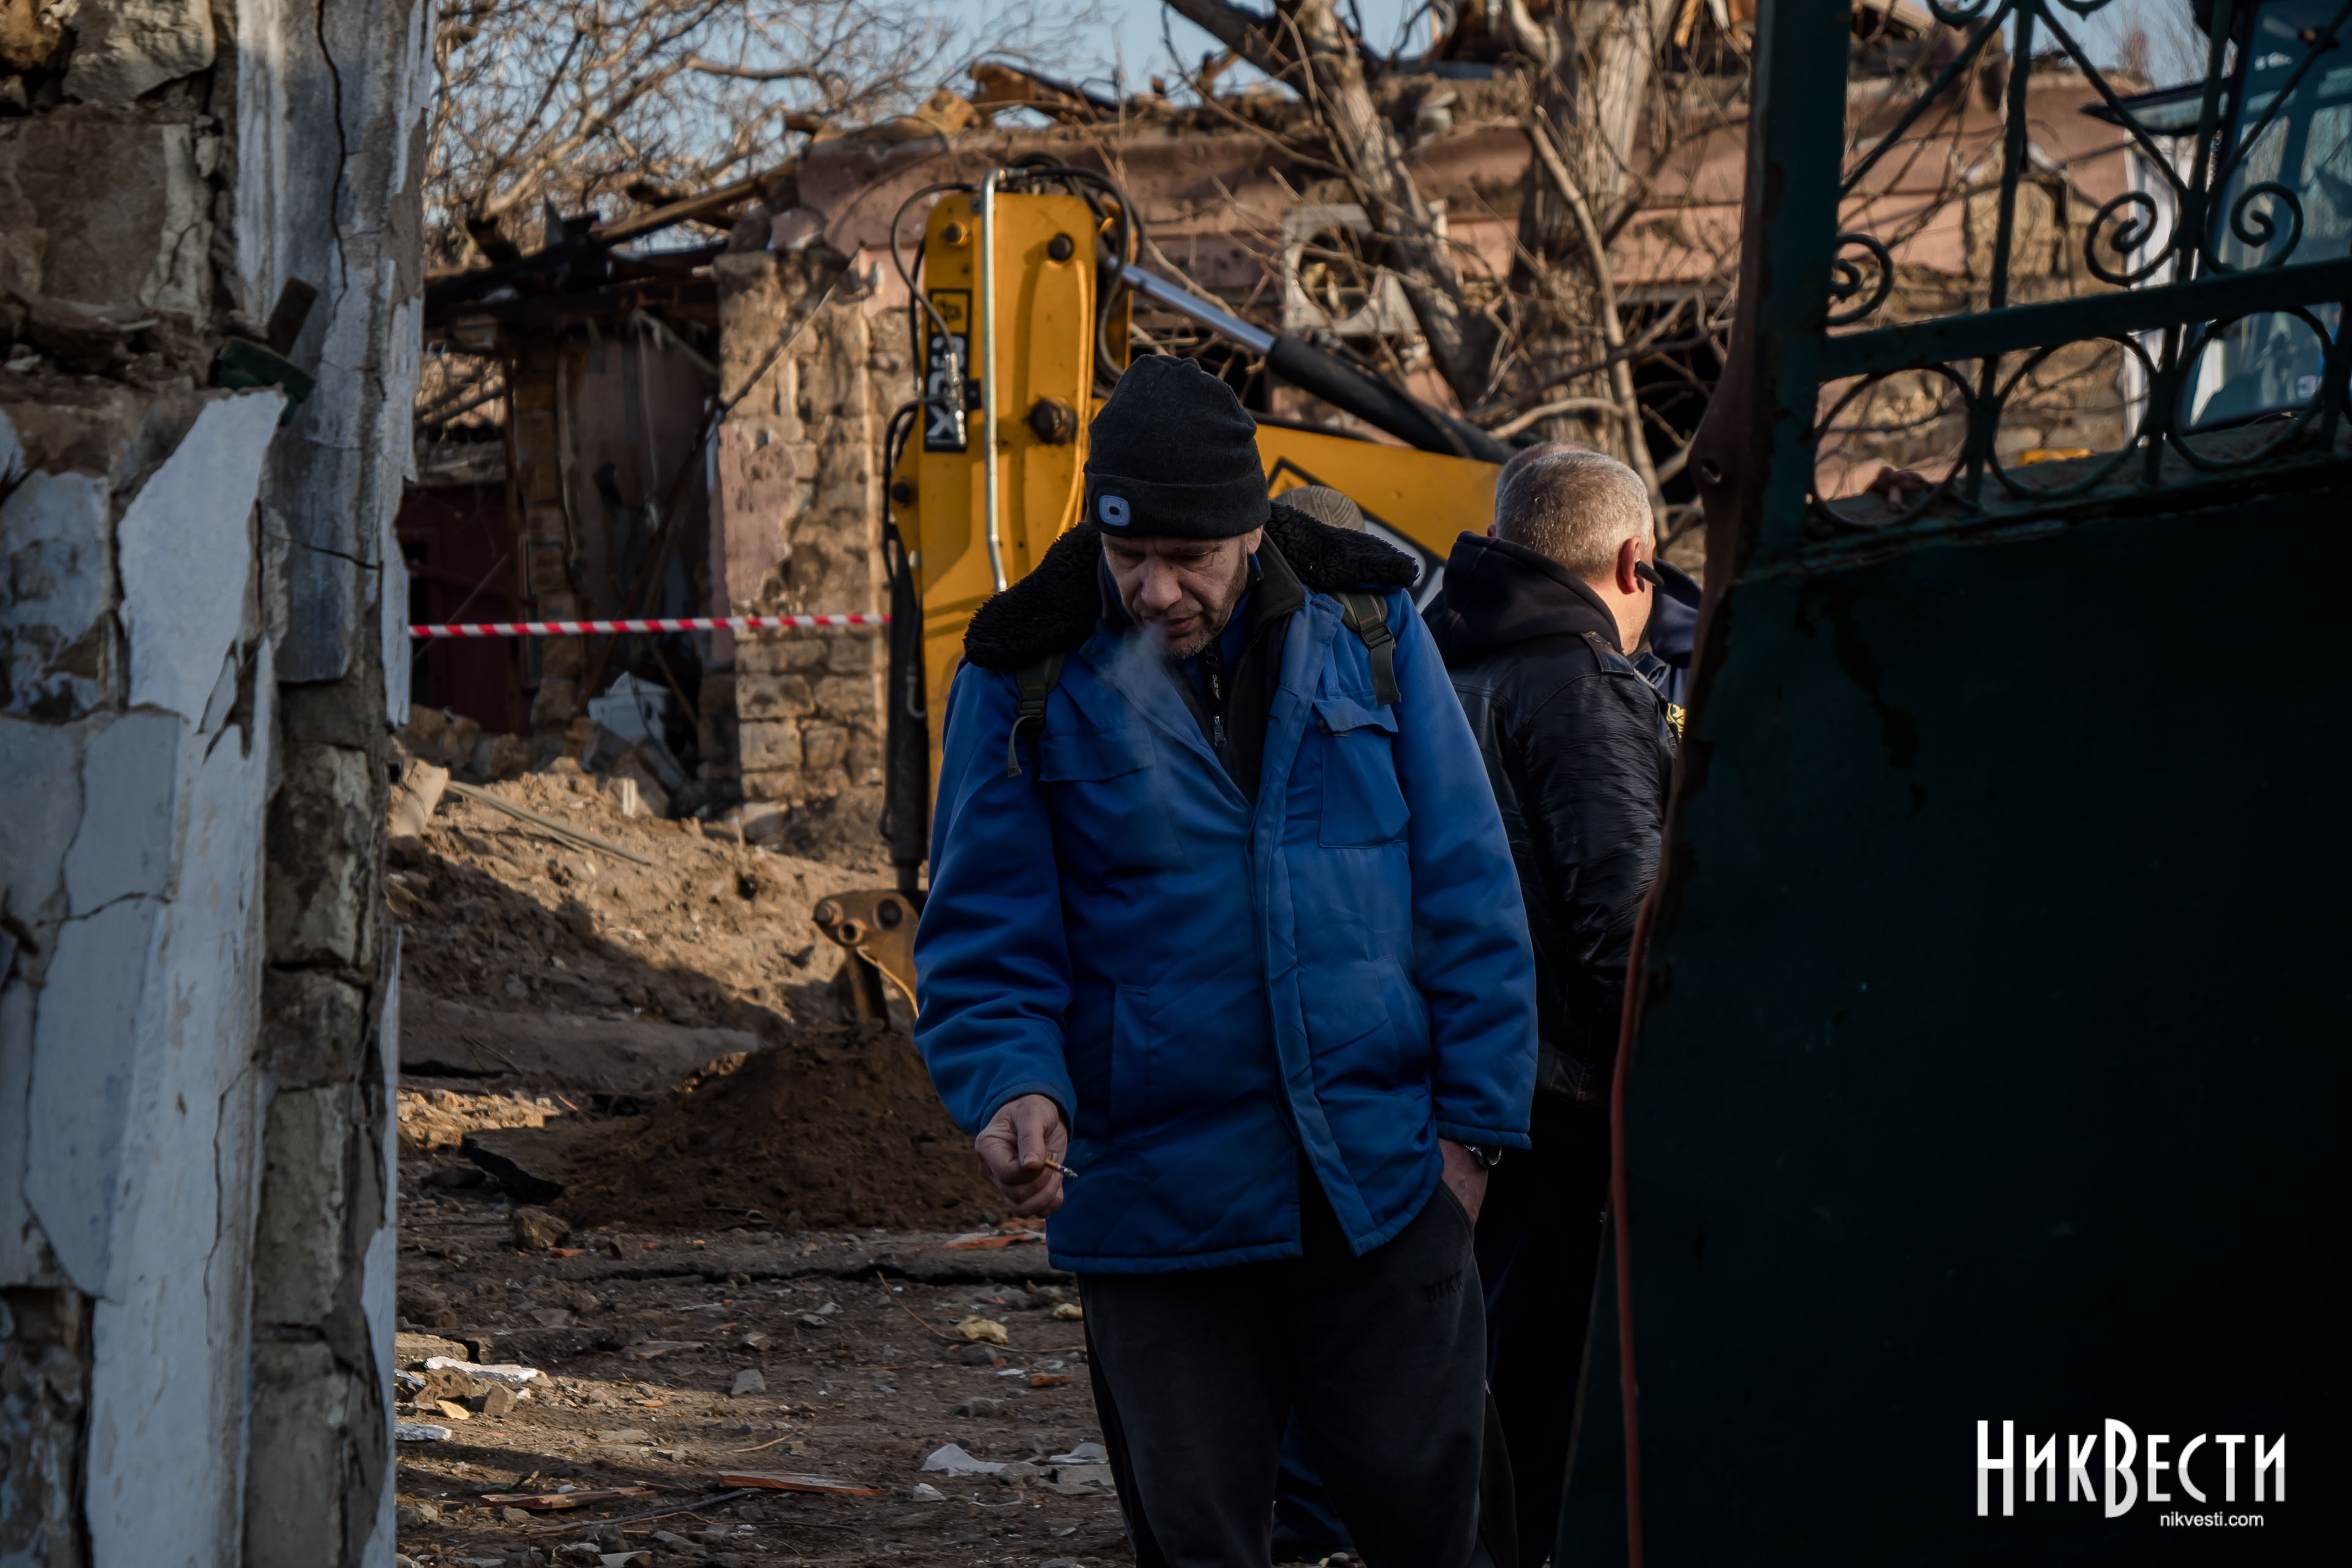 Consequences of the Mykolaiv missile attack, photo: Serhiy Ovcharyshyn, «NykVesty"